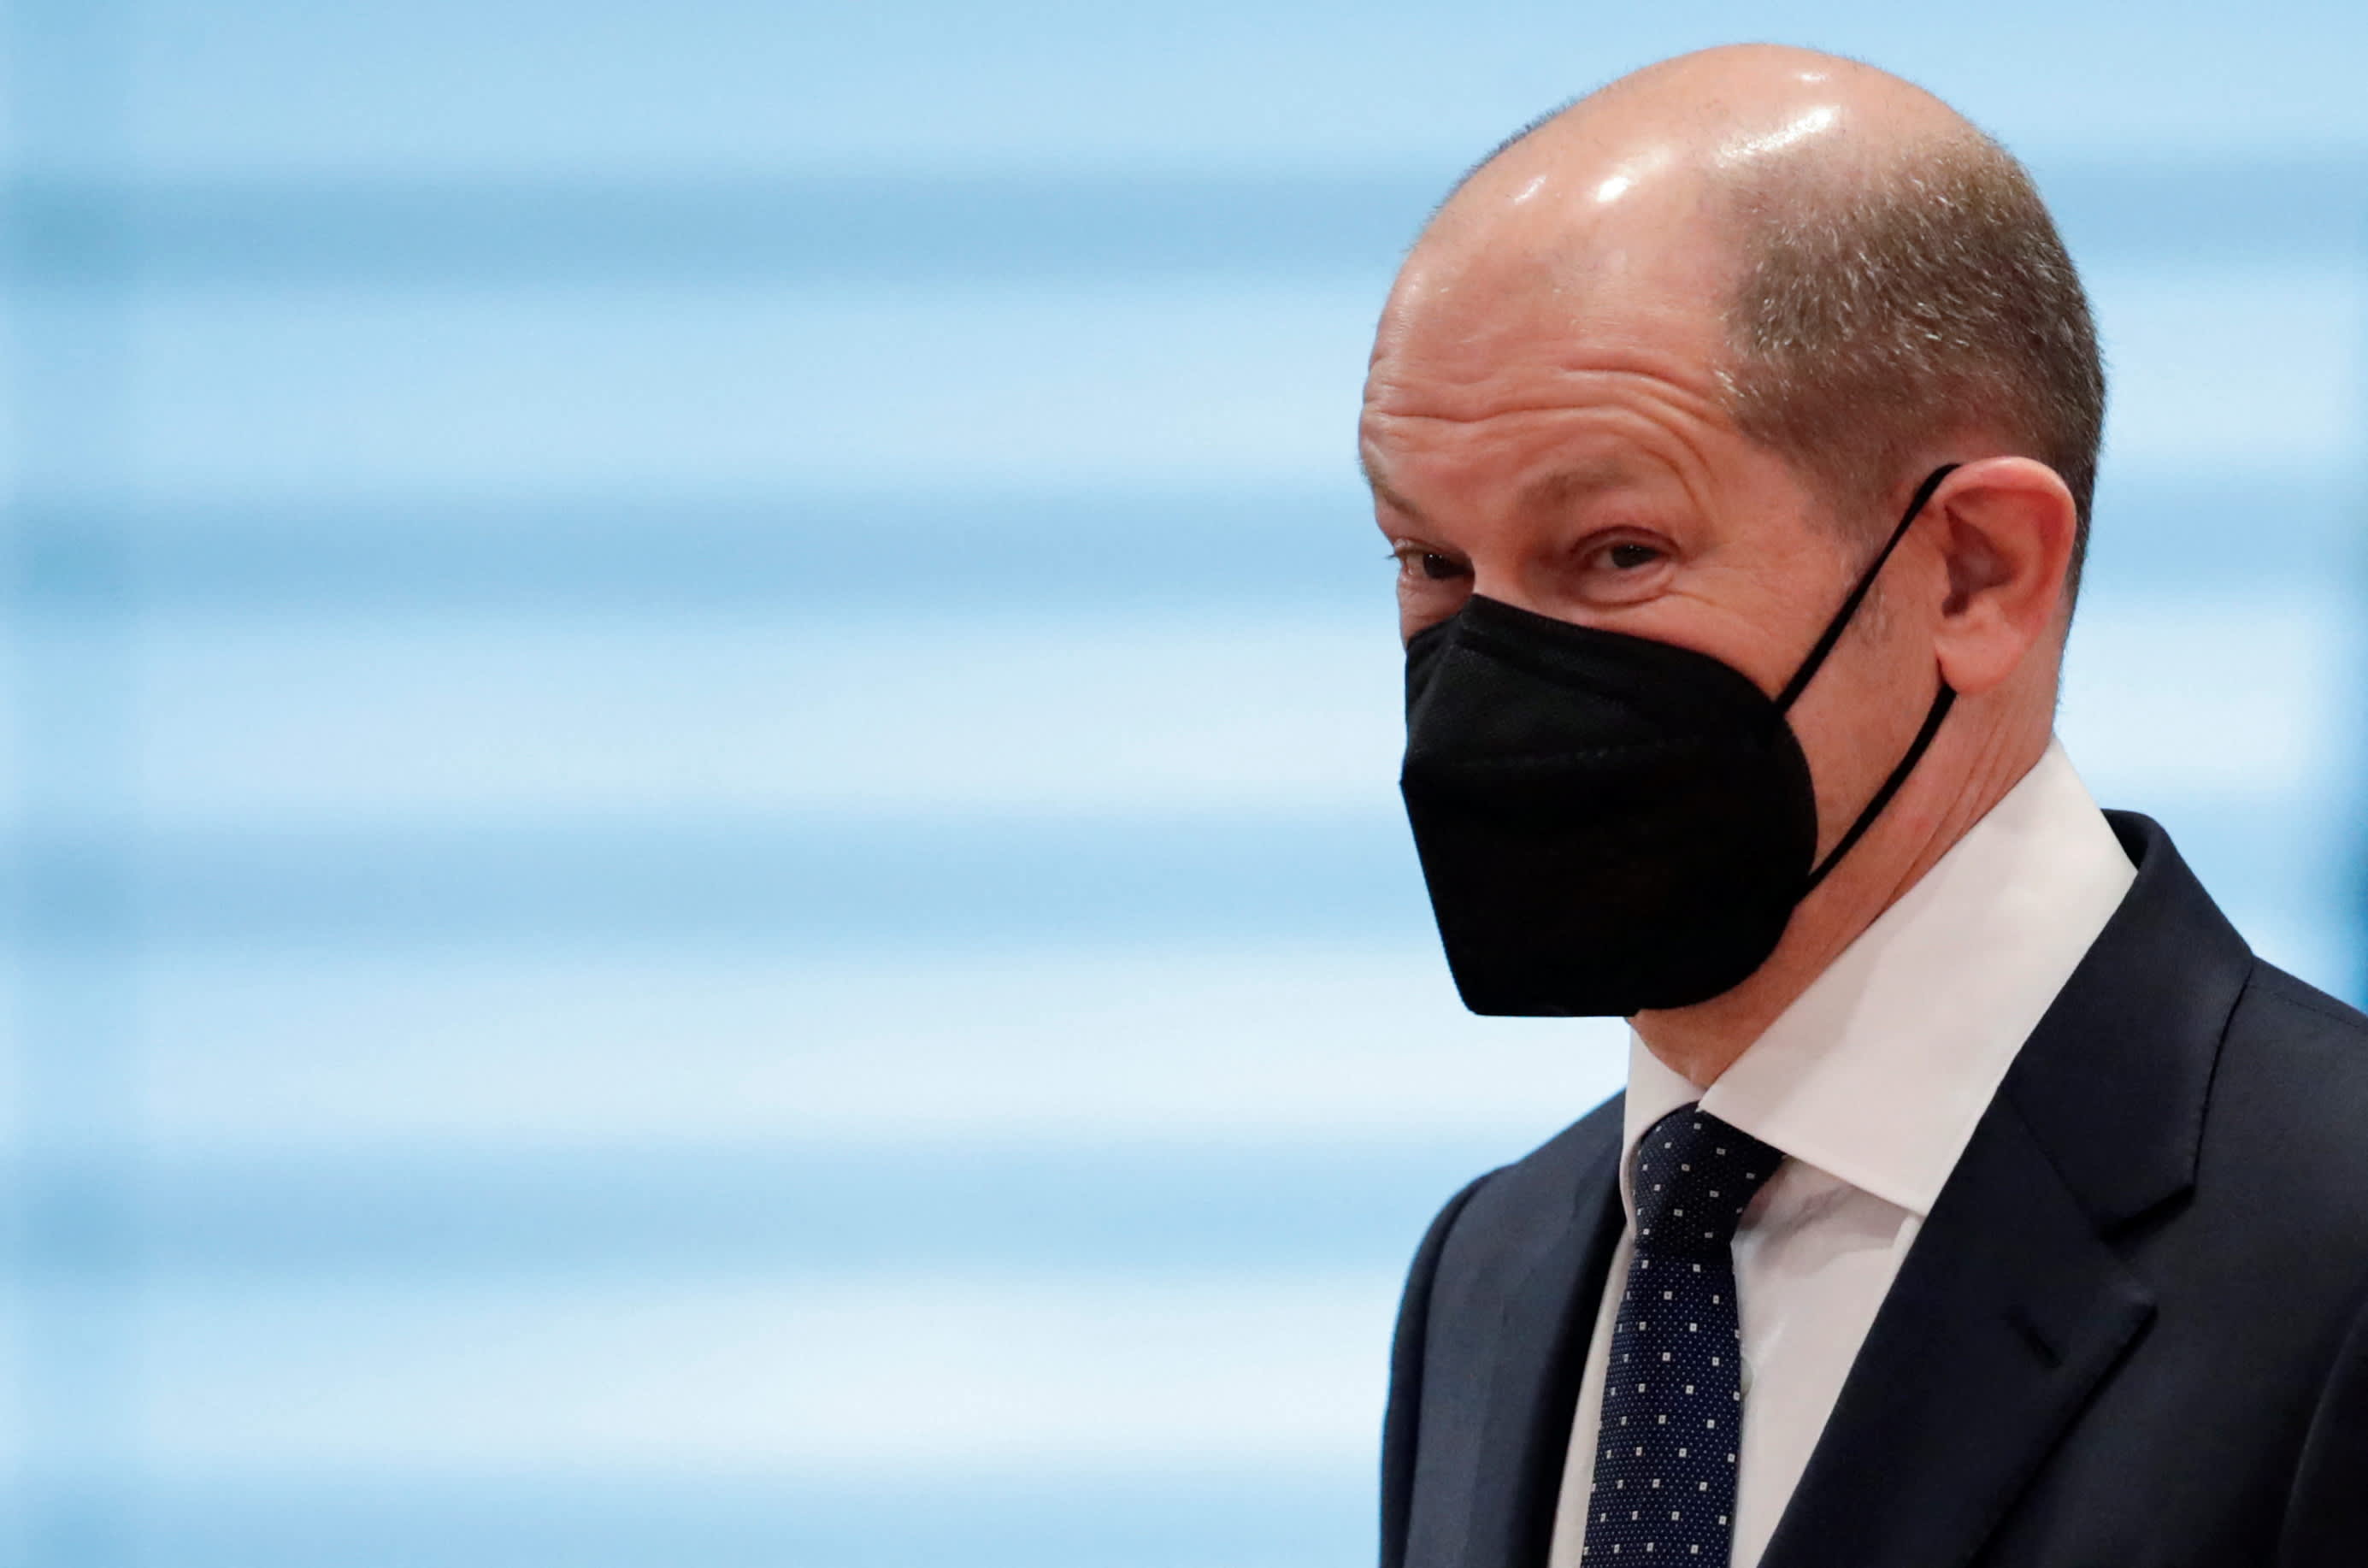 Germany’s Scholz on Covid crisis, vaccinations and higher taxes